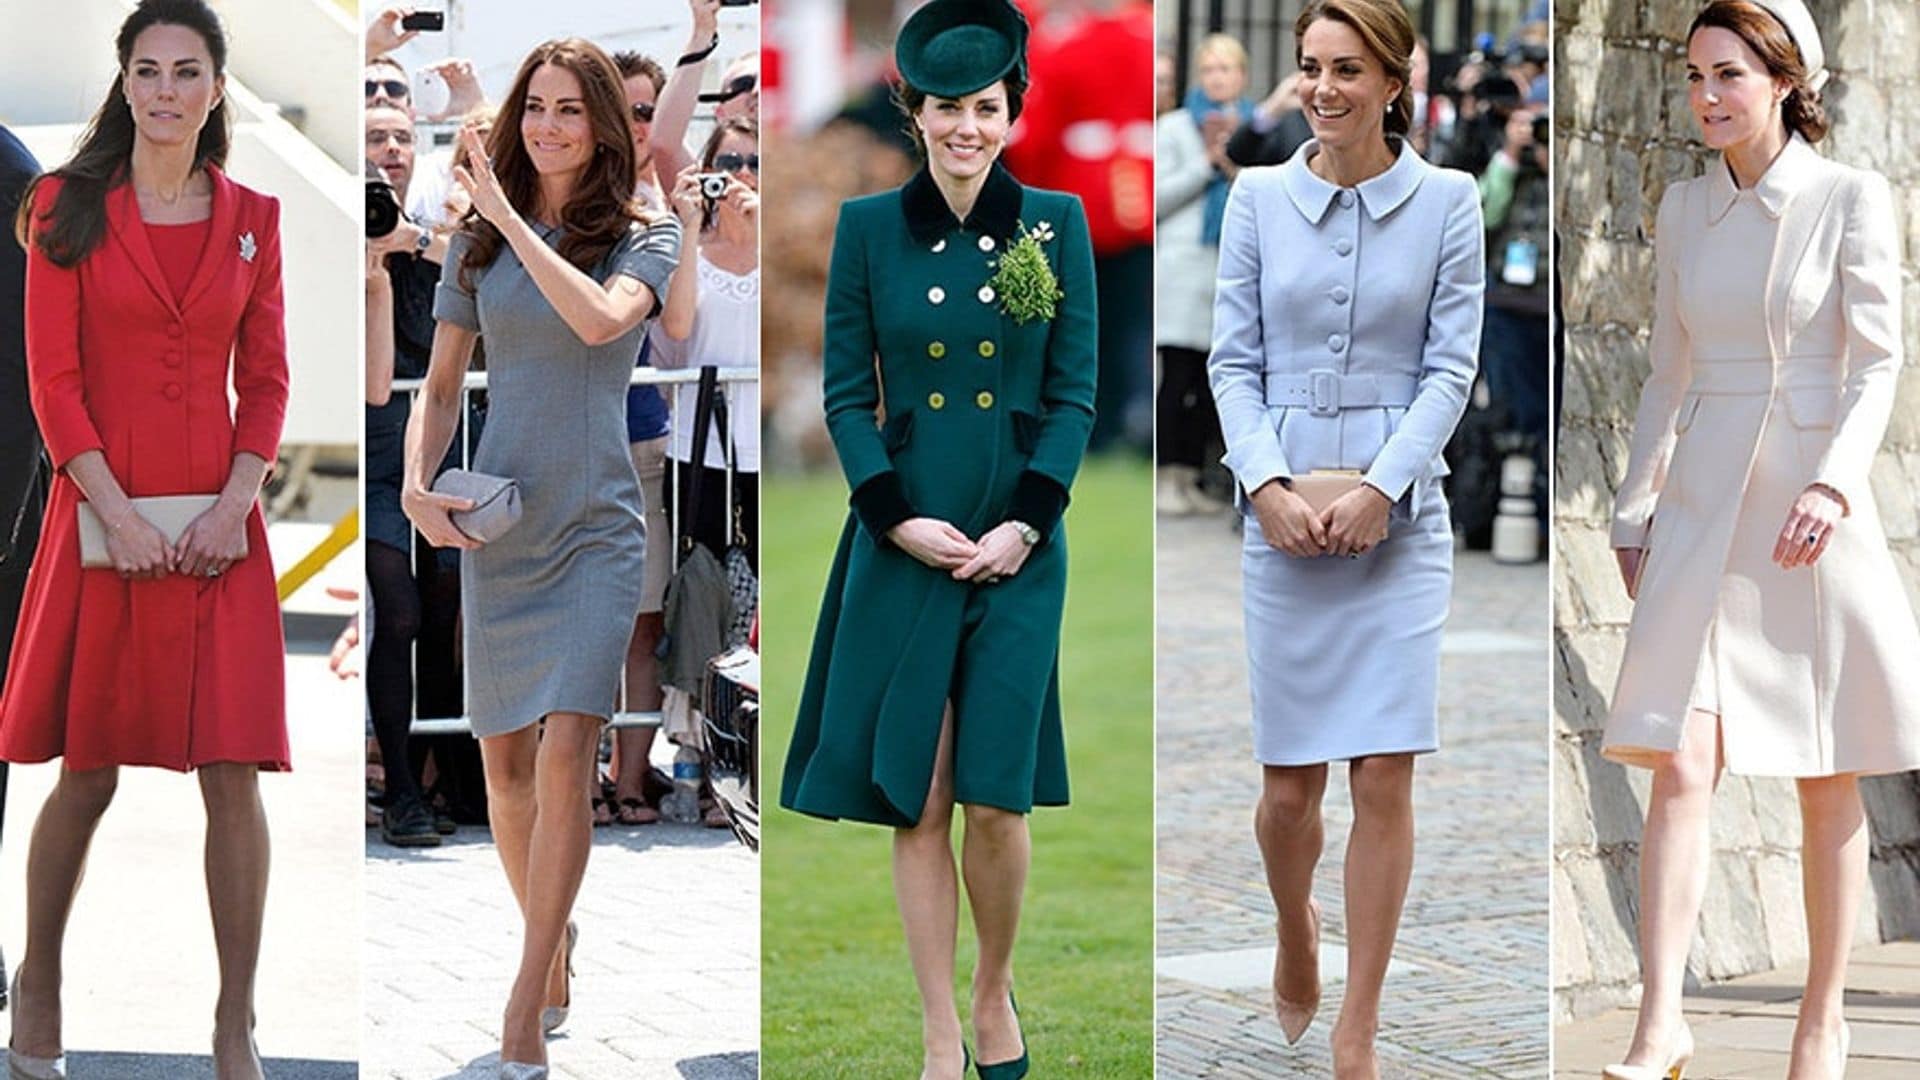 Kate Middleton's top looks by Princess Diana favorite Catherine Walker